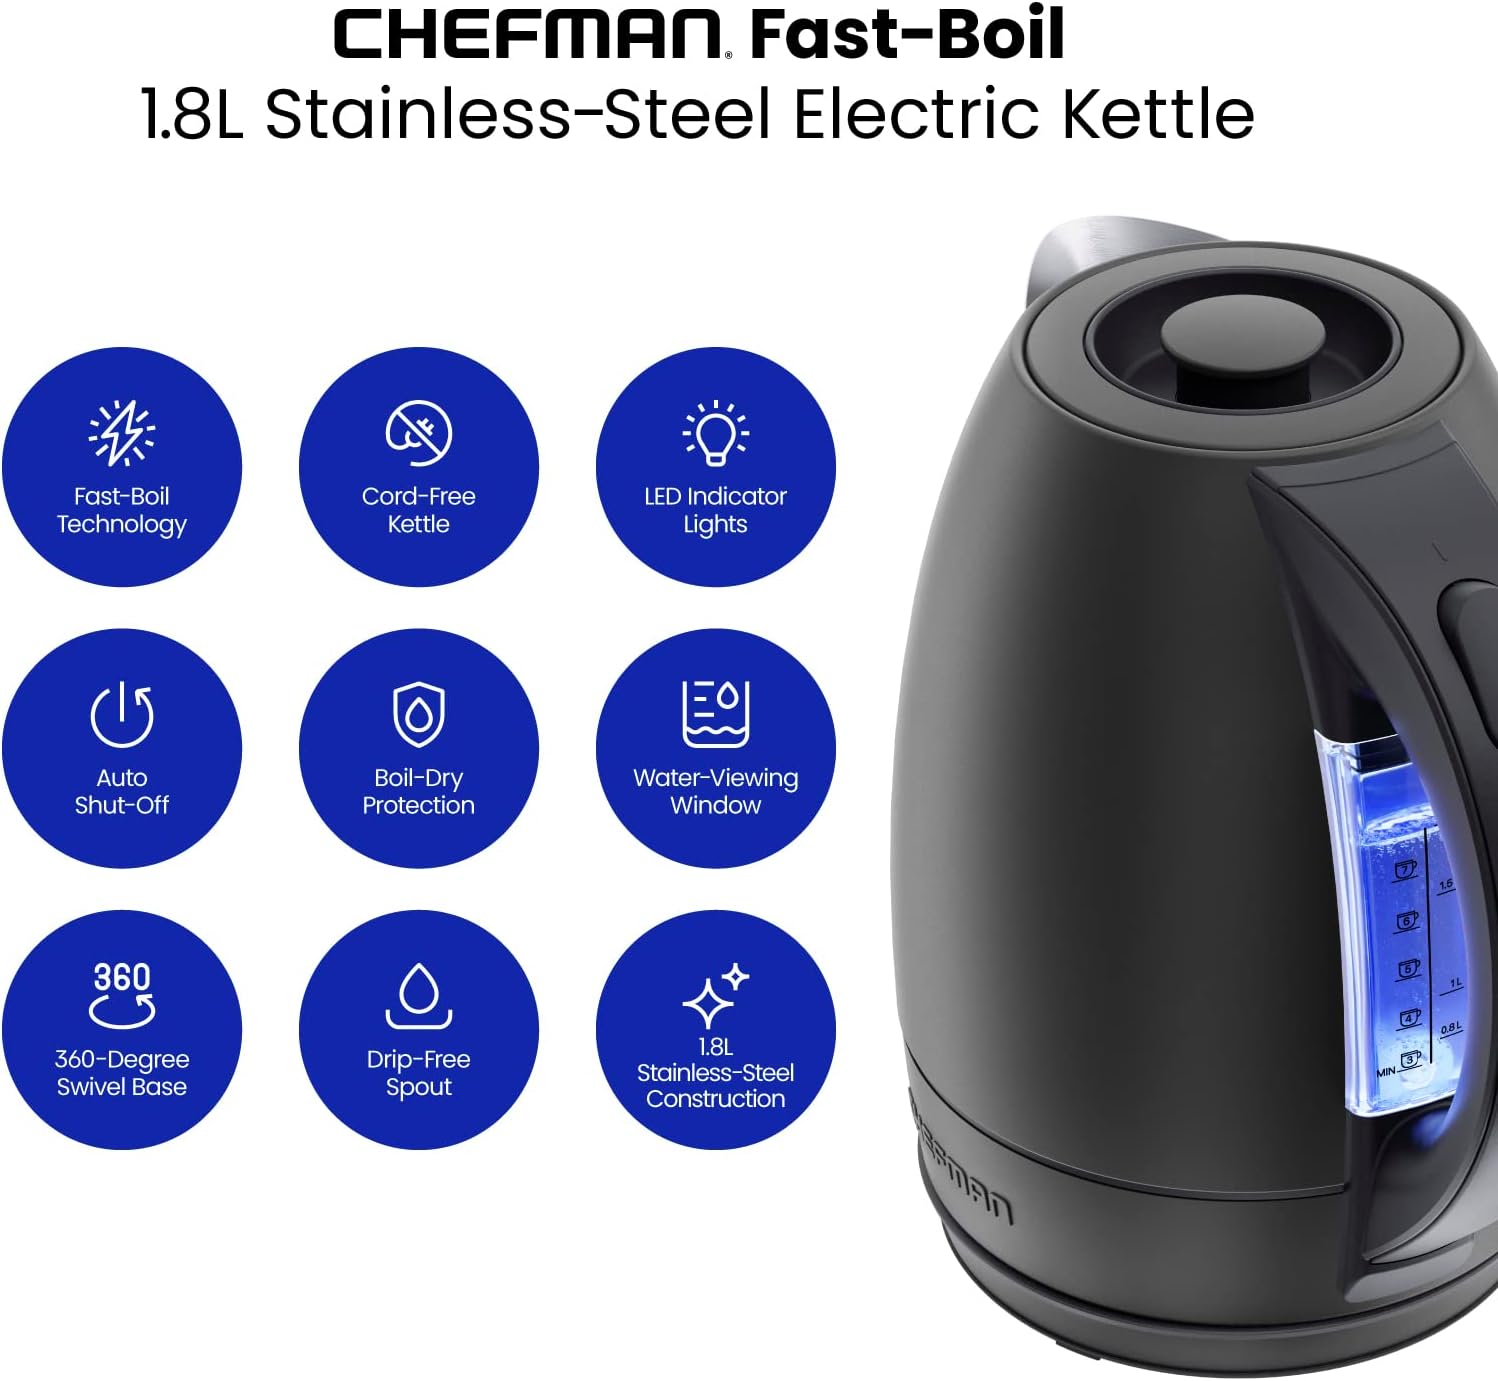 Chefman Electric Kettle Review